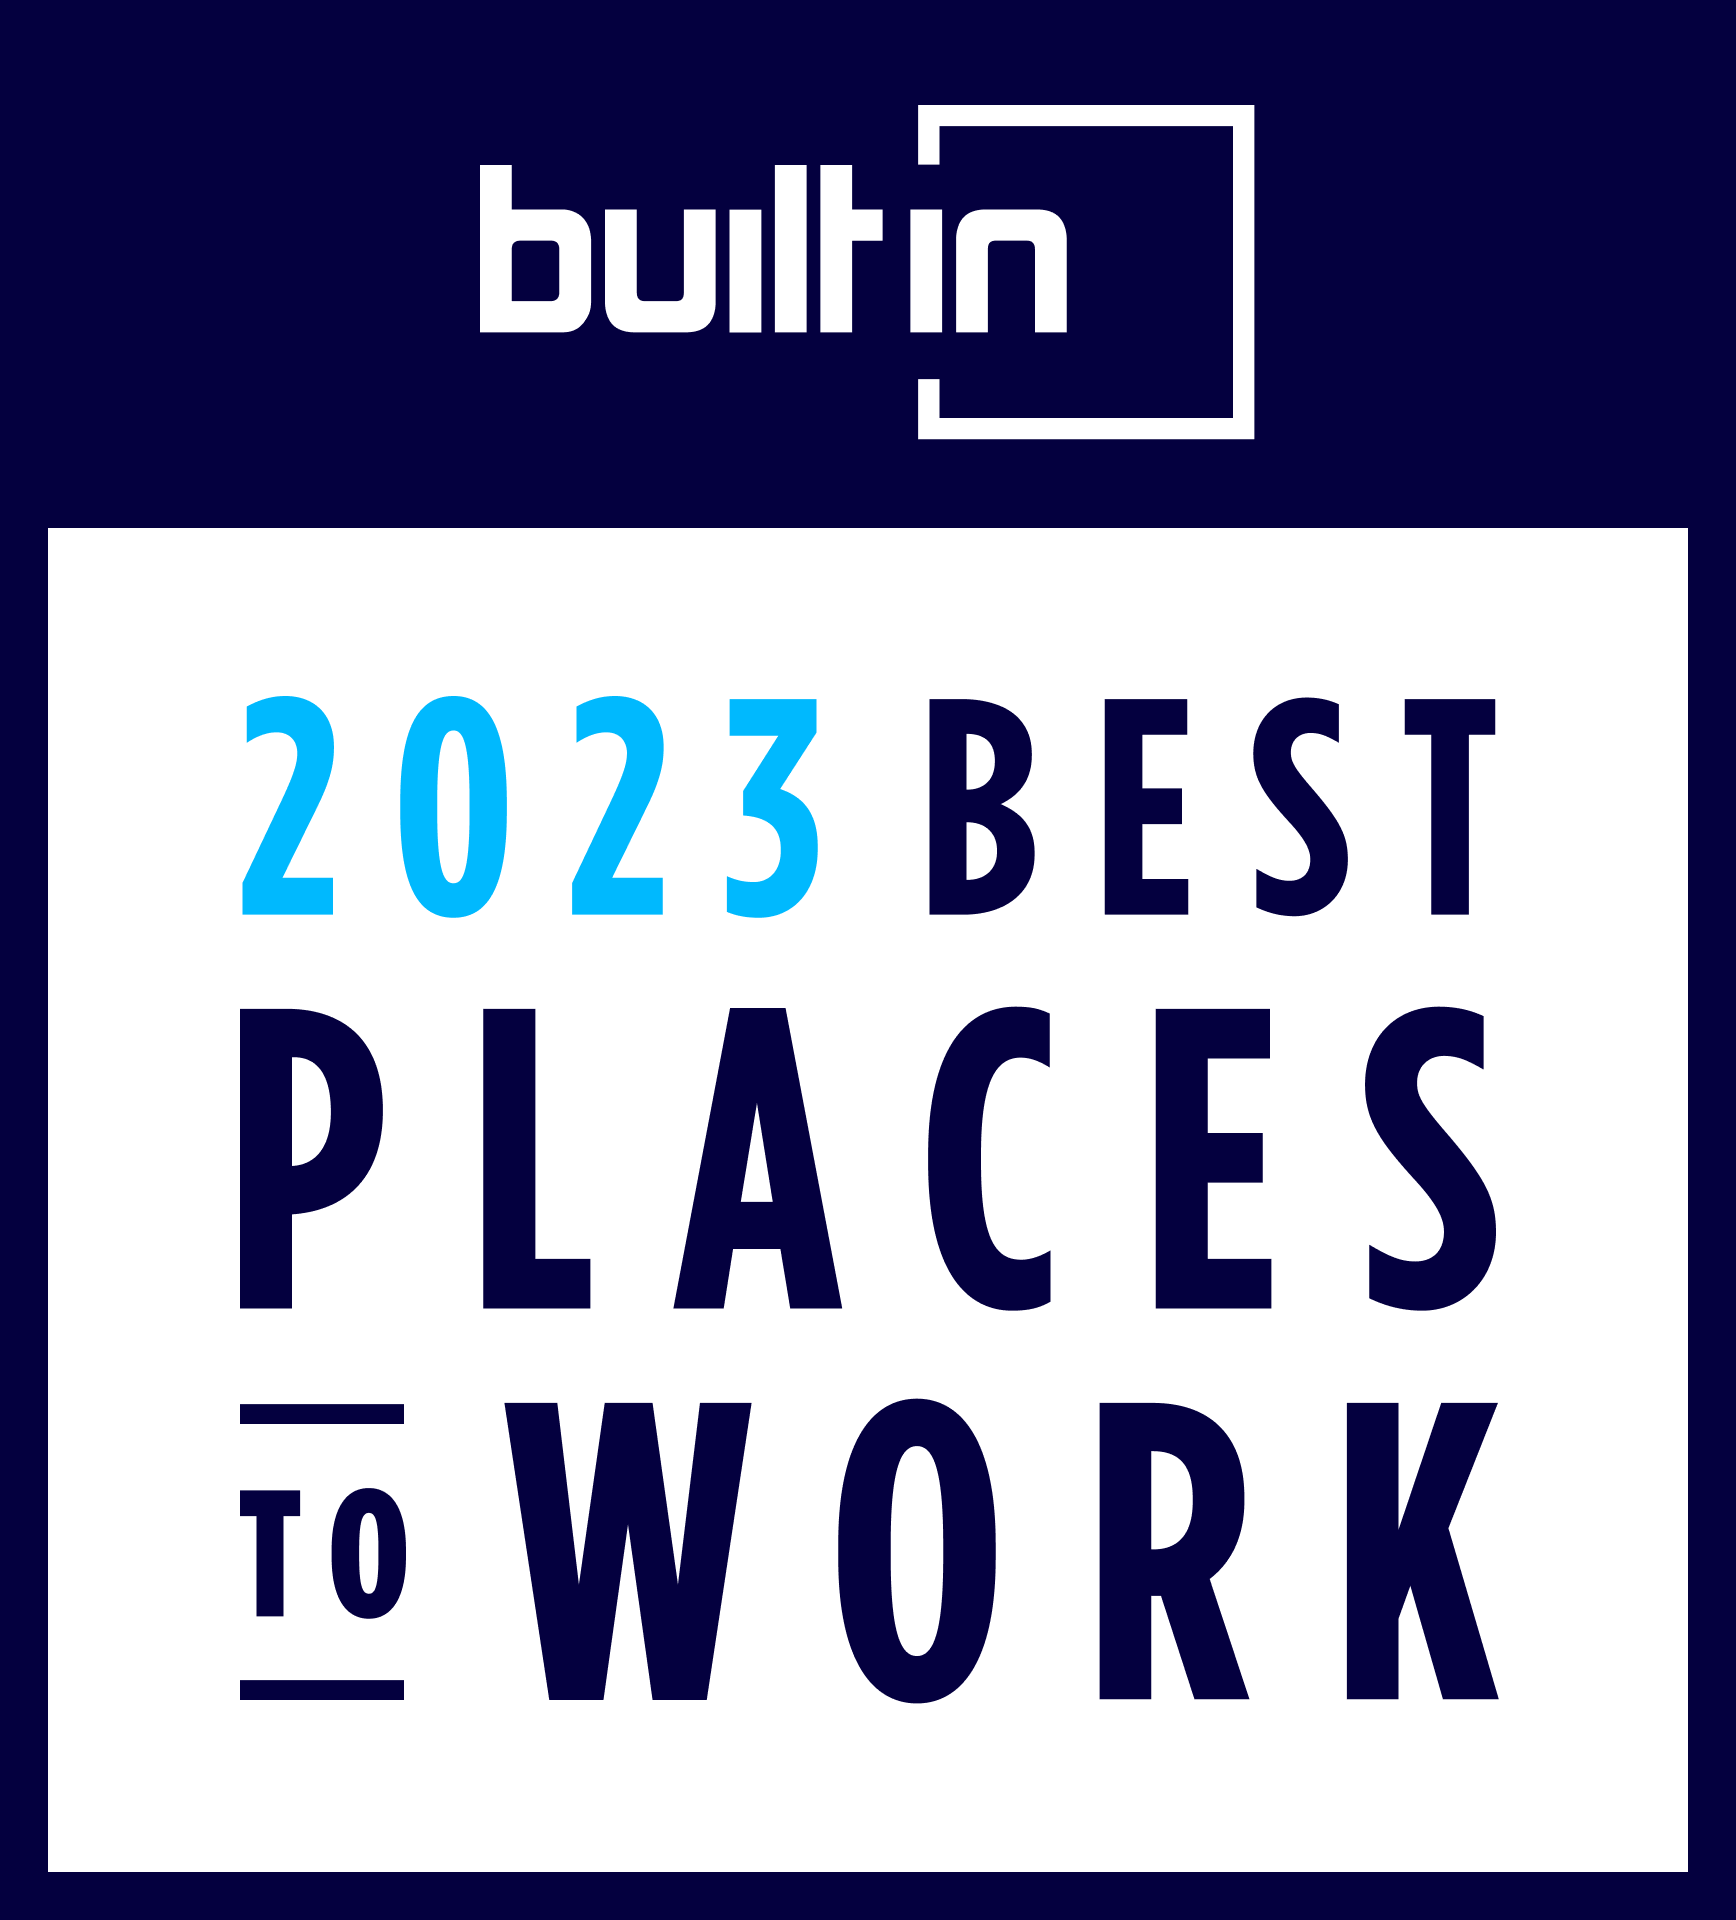 Built in 2023 best place to work